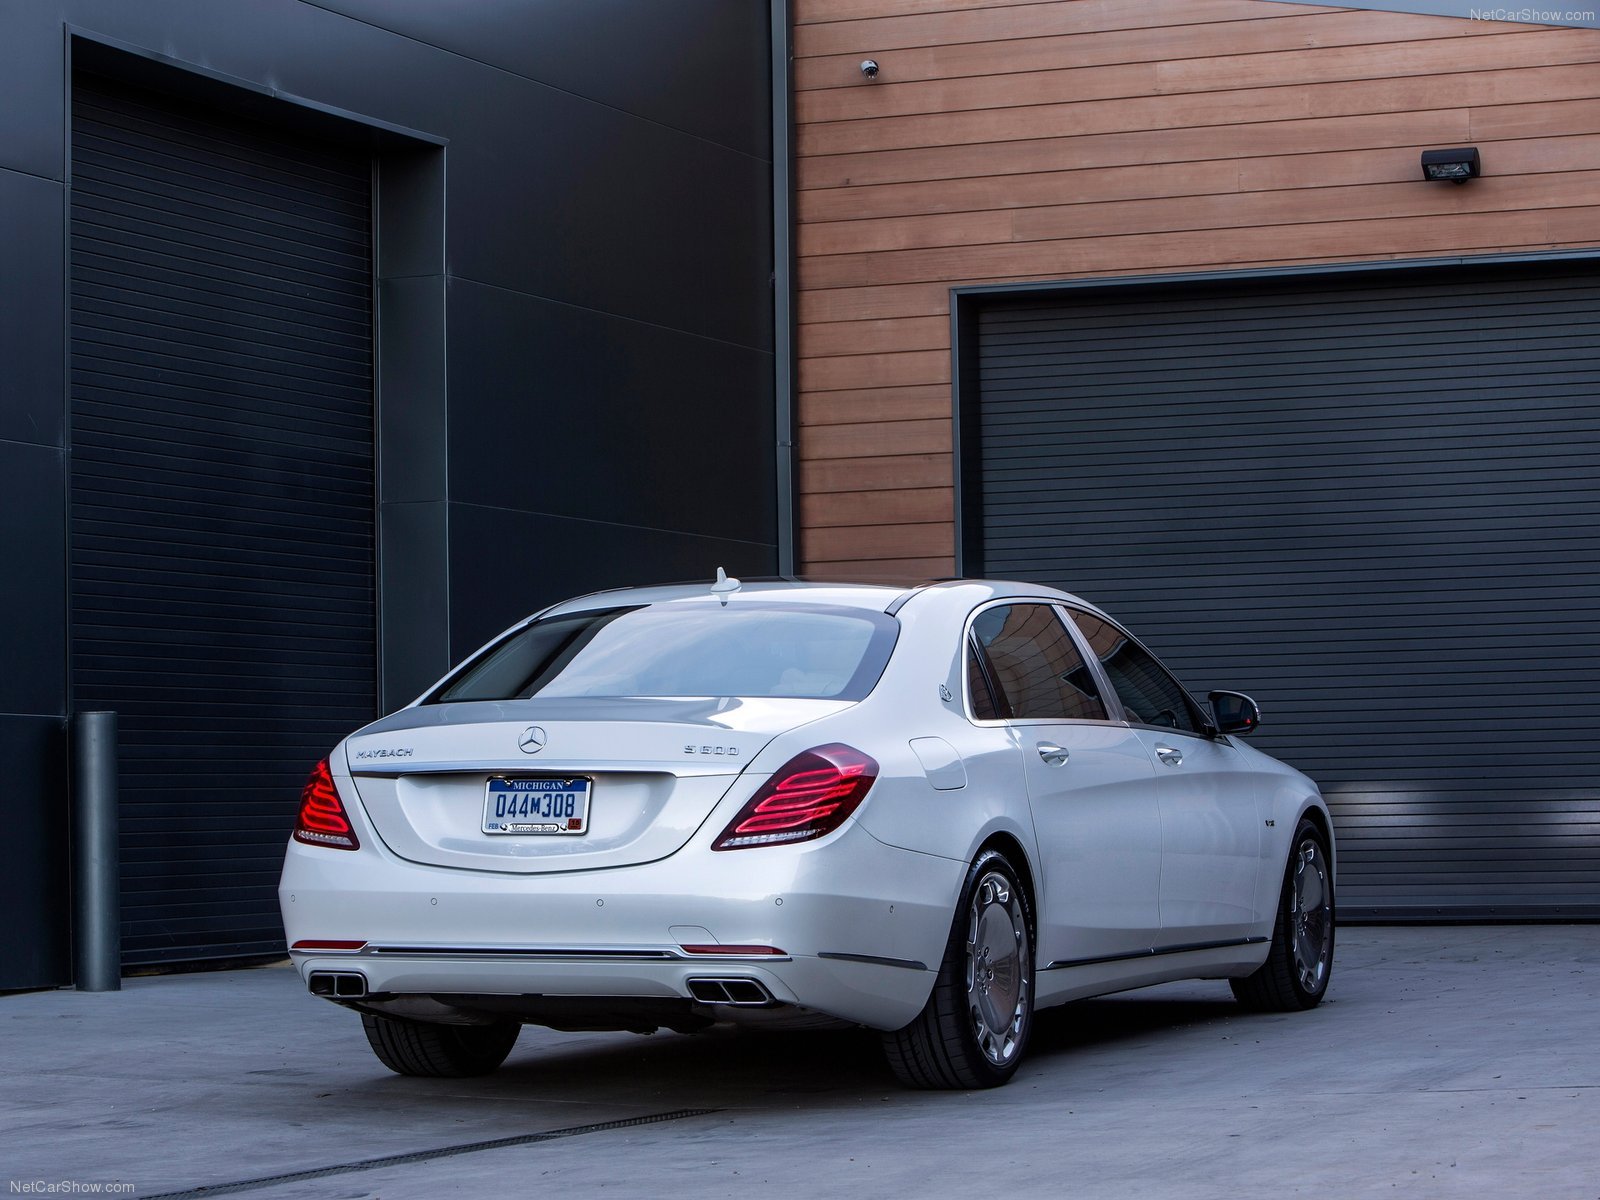 2015, Cars, Limousine, Luxury, Maybach, Mercedes, S600 Wallpaper